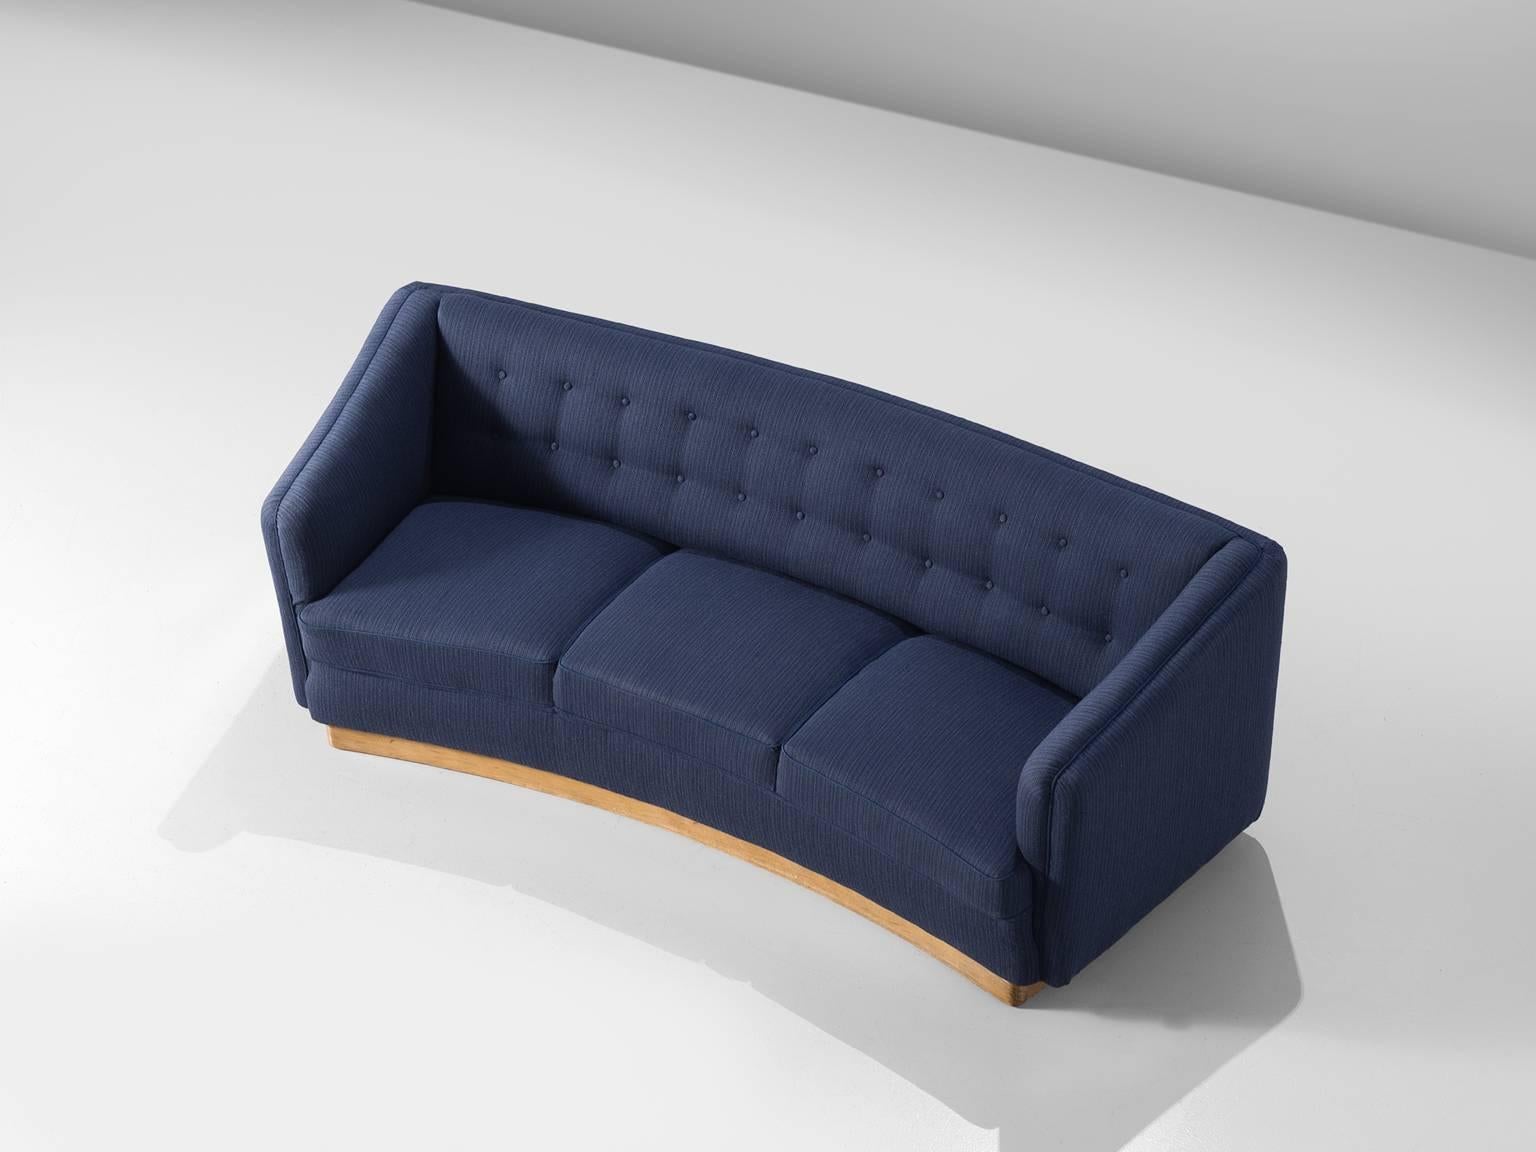 Three-seat sofa, navy blue upholstery, wooden base, 1960s, Denmark.

This curved three-seat sofa with a deep blue upholstery is finished with a slightly lighter tone piping. The sofa is slightly curved and has a padded back and unusually high